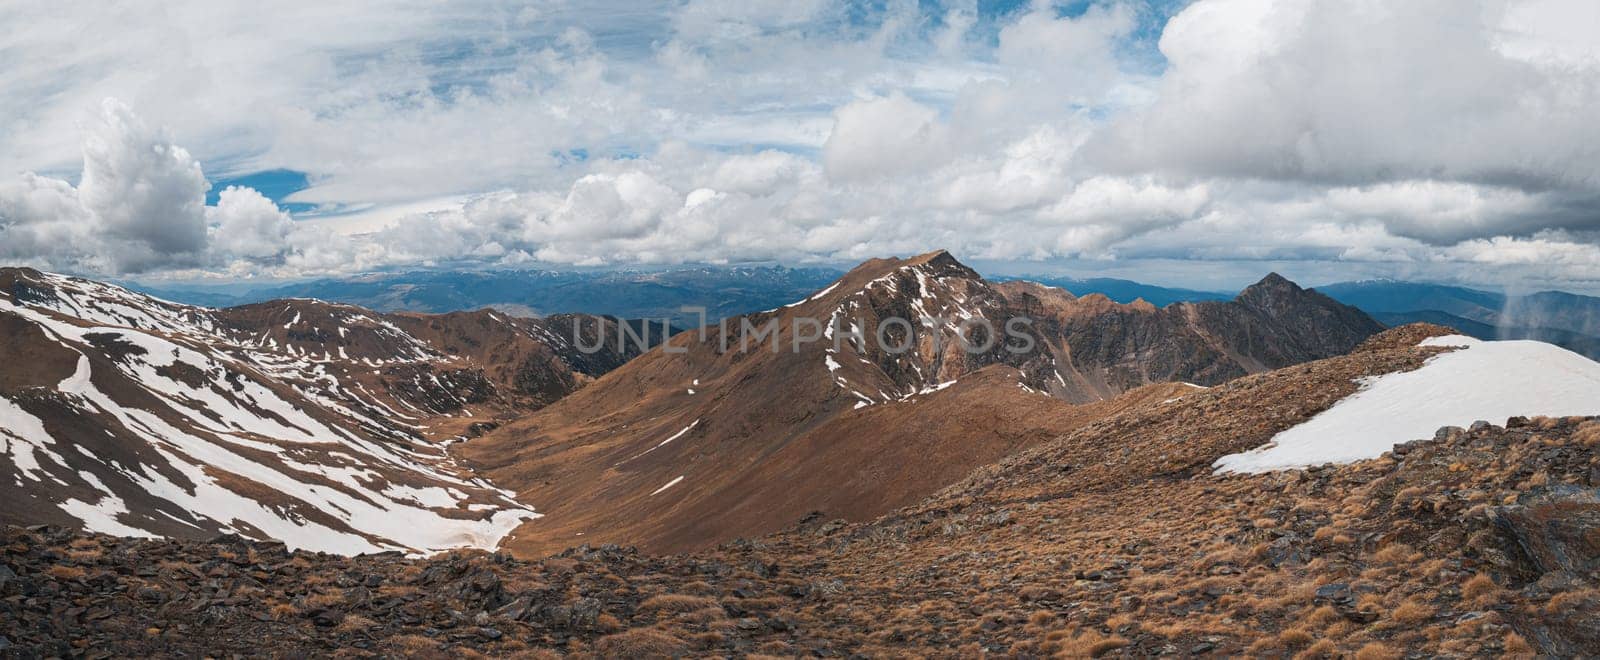 Panoramic delightful view of the steep snowy slopes on a cloudy day in the Pyrenees mountains on the sky. Concept of south european mountain nature. Copyspace by apavlin